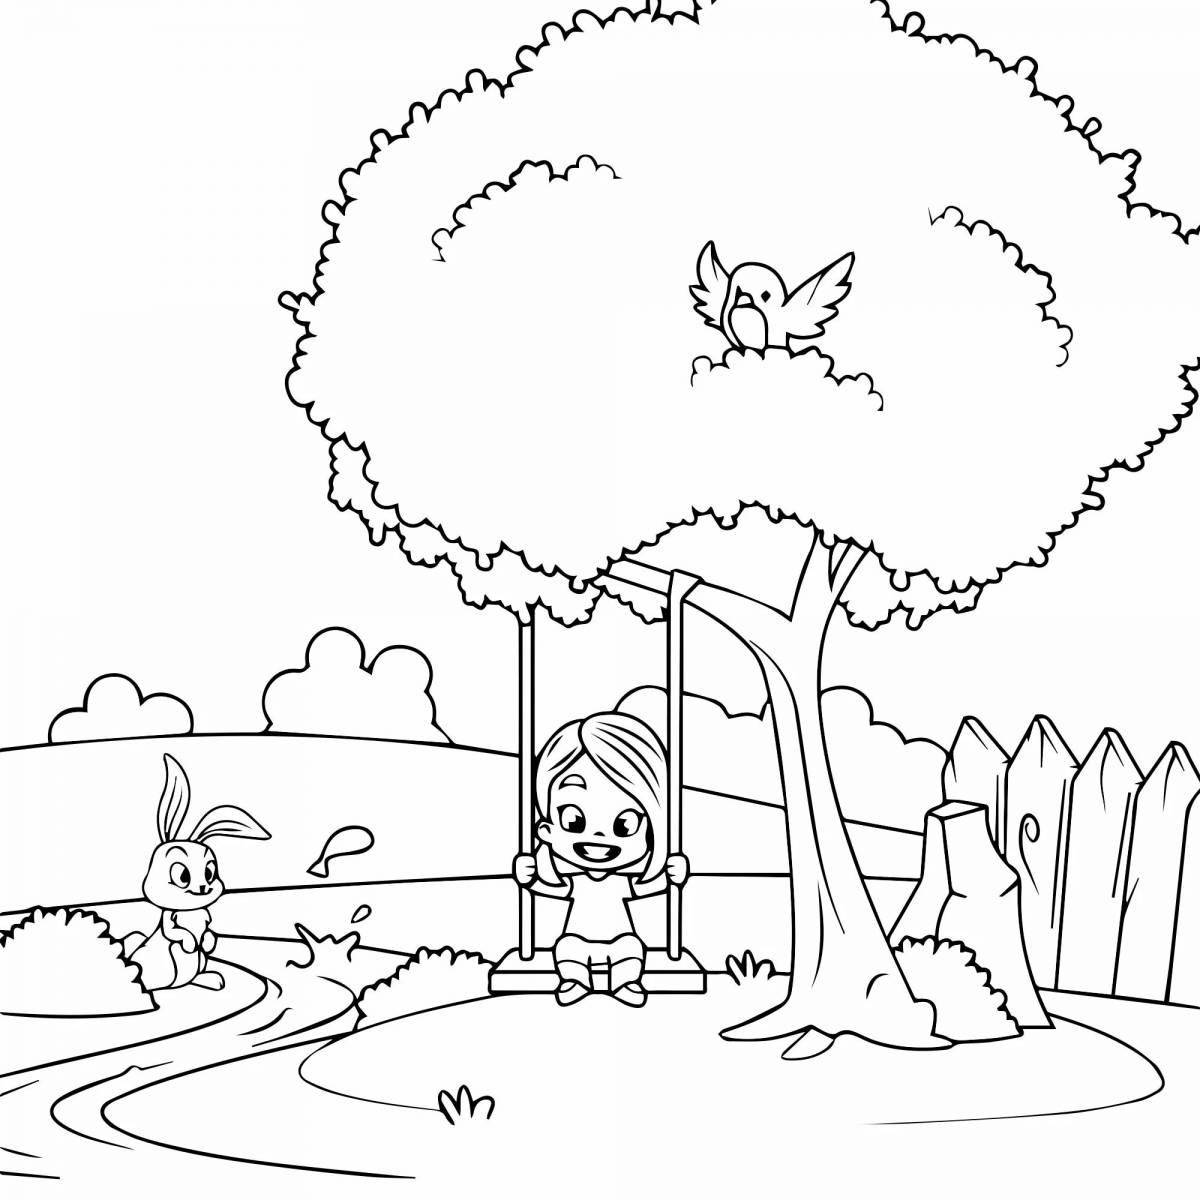 Colorful park coloring pages for kids